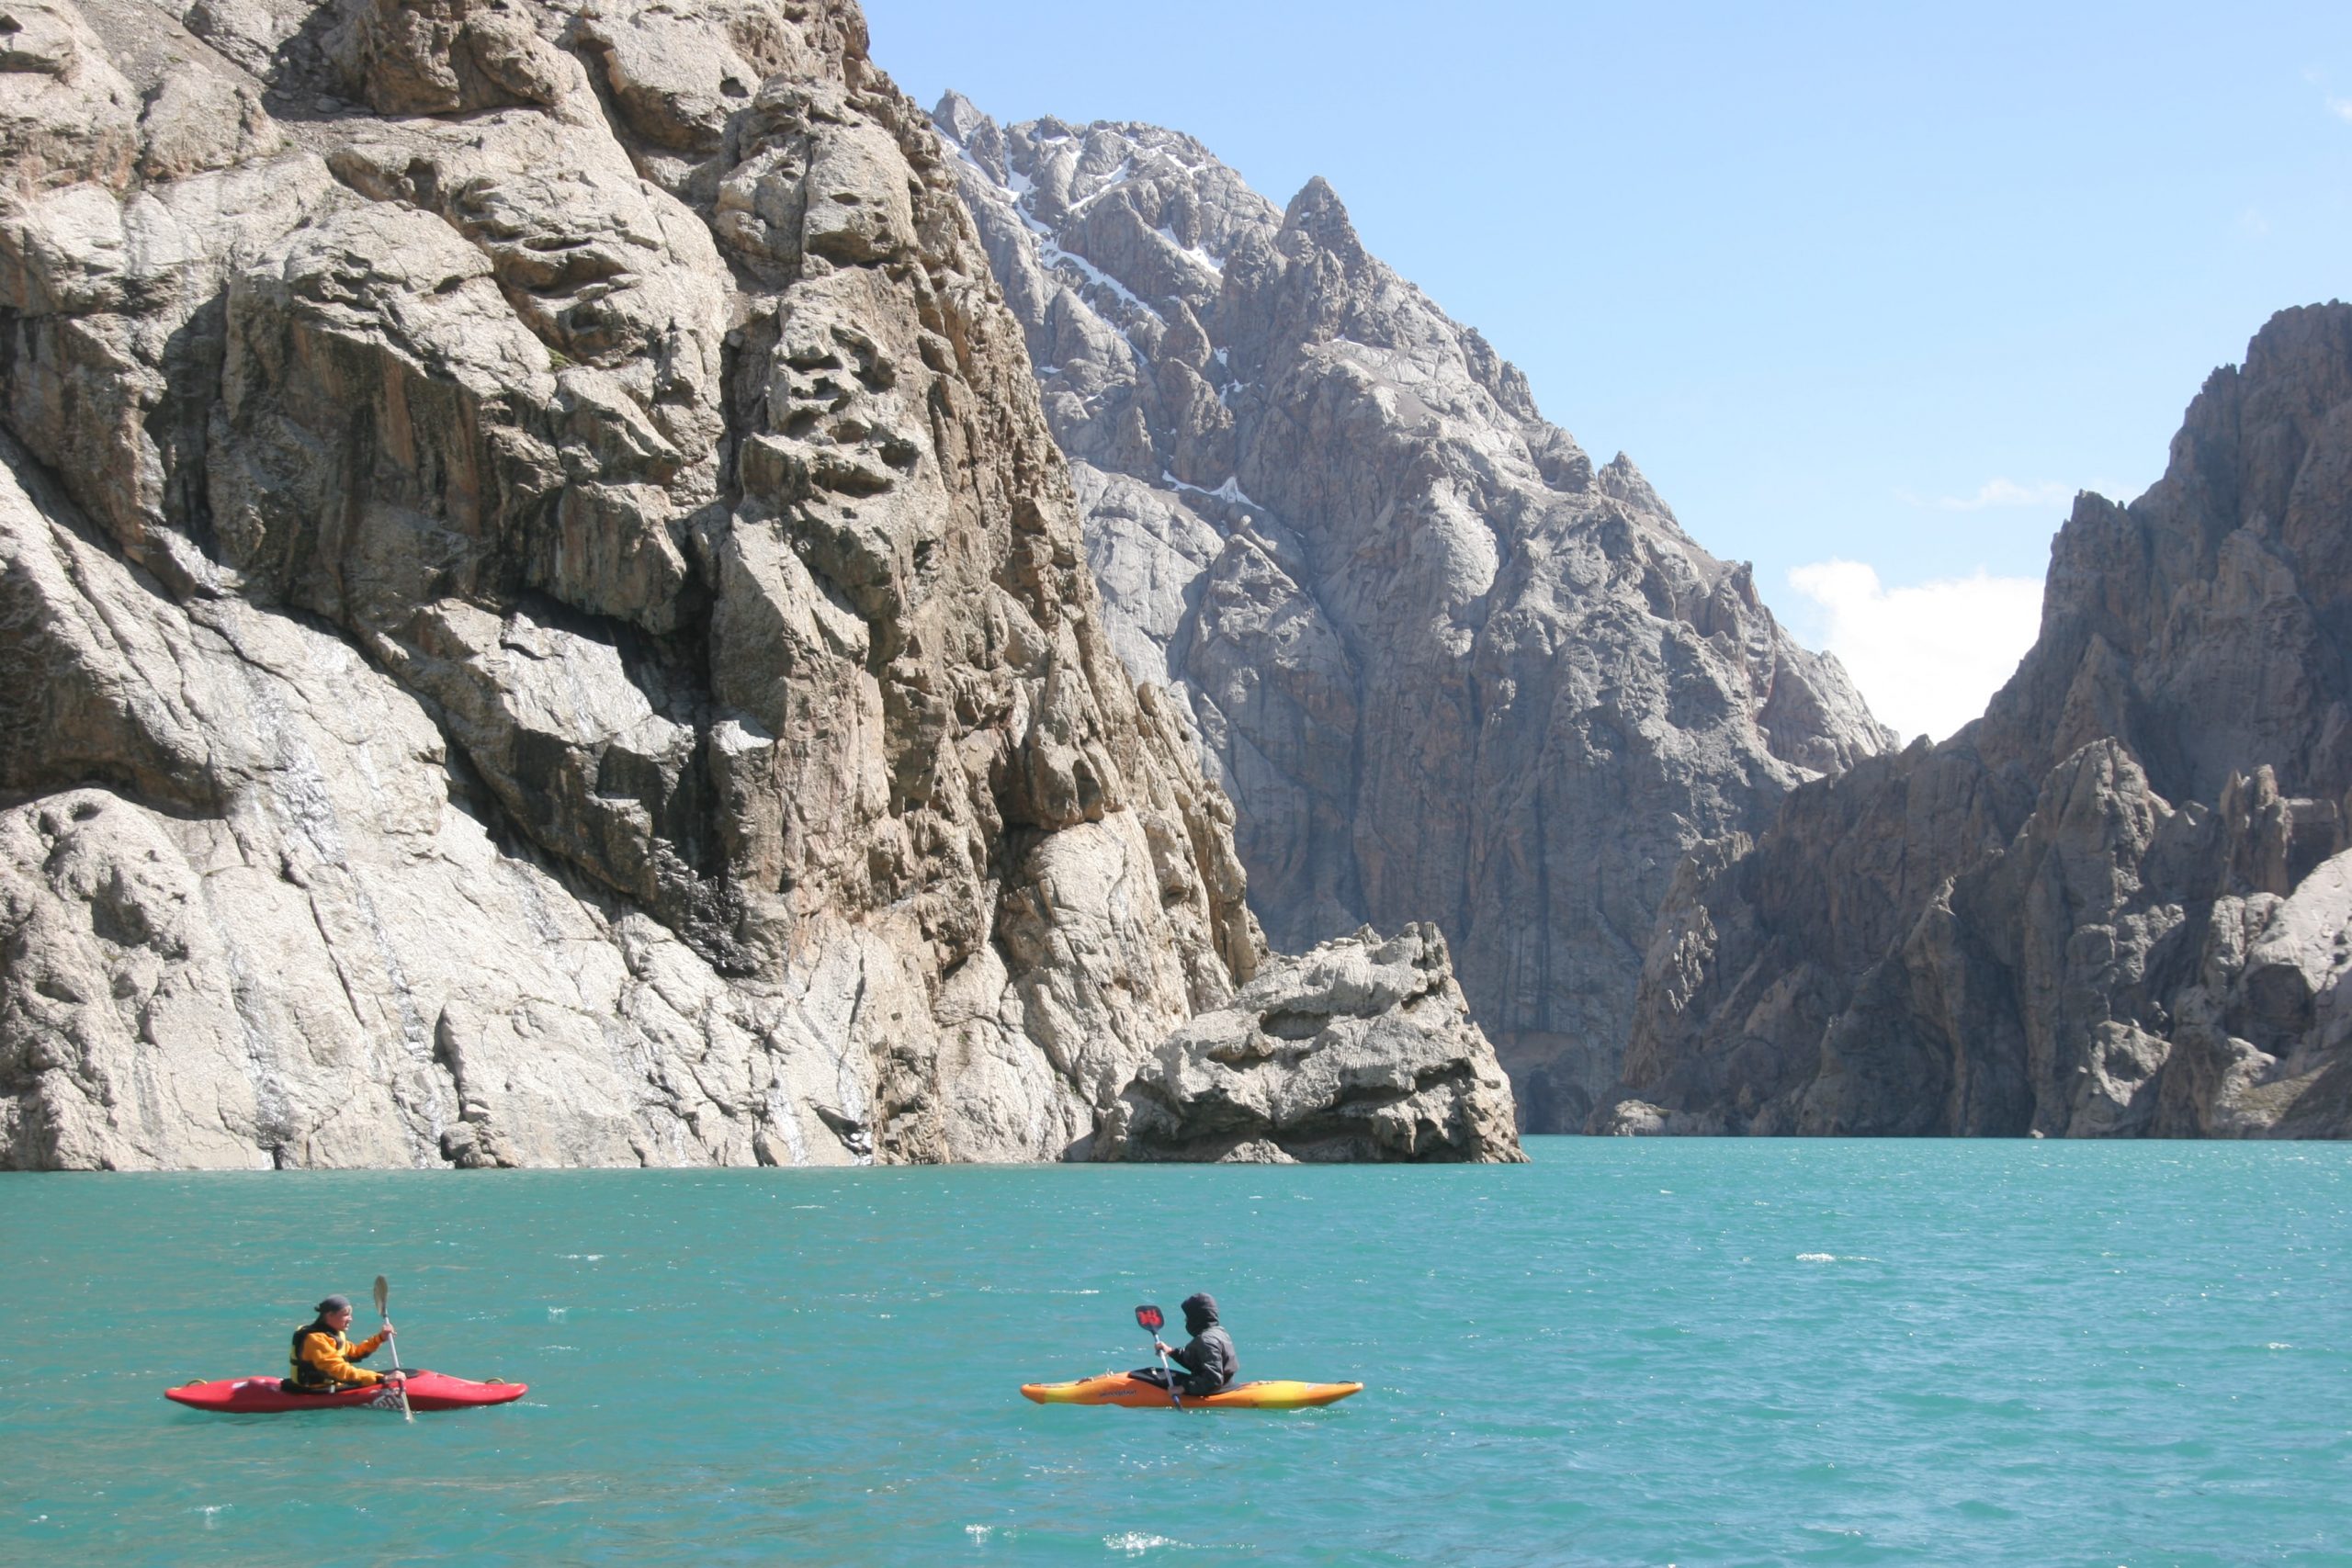 Kayakers on an alpine lake surrounded by rocky mountains.